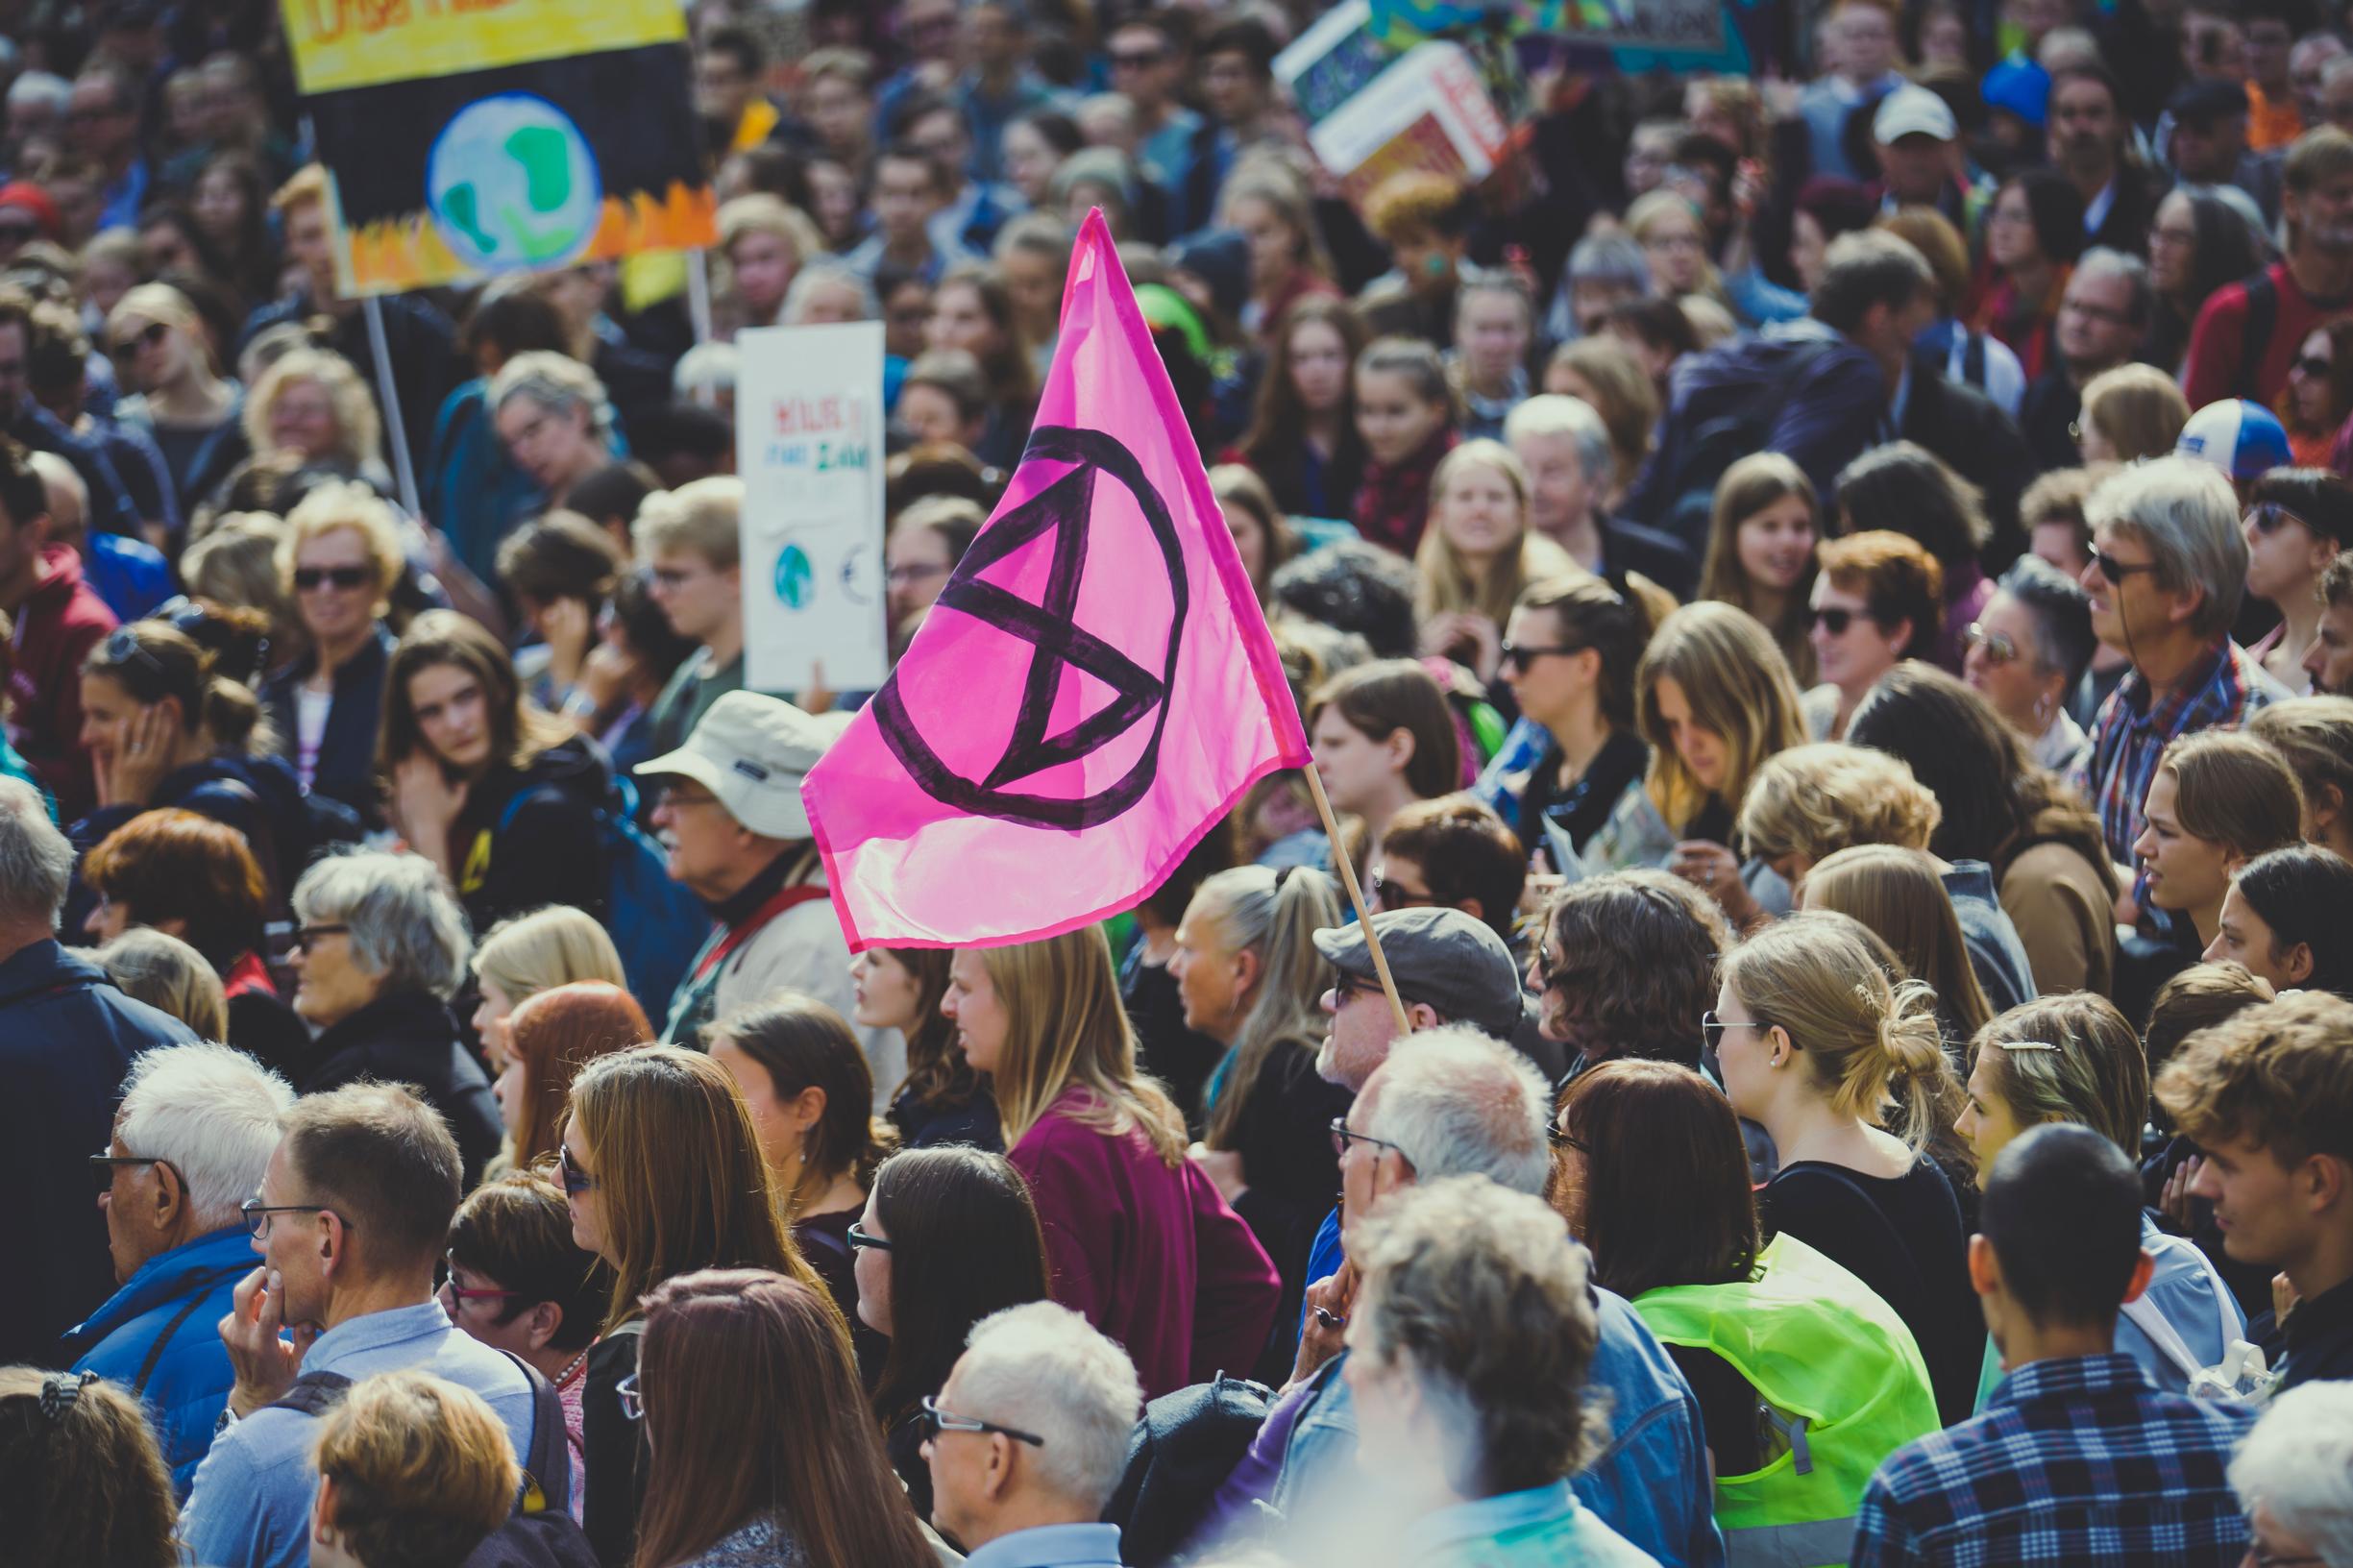 Ipsos MORI says 27% of the public placed environmental concerns among their top three priorities at the time of the protests by Extinction Rebellion, but this later fell to 10%